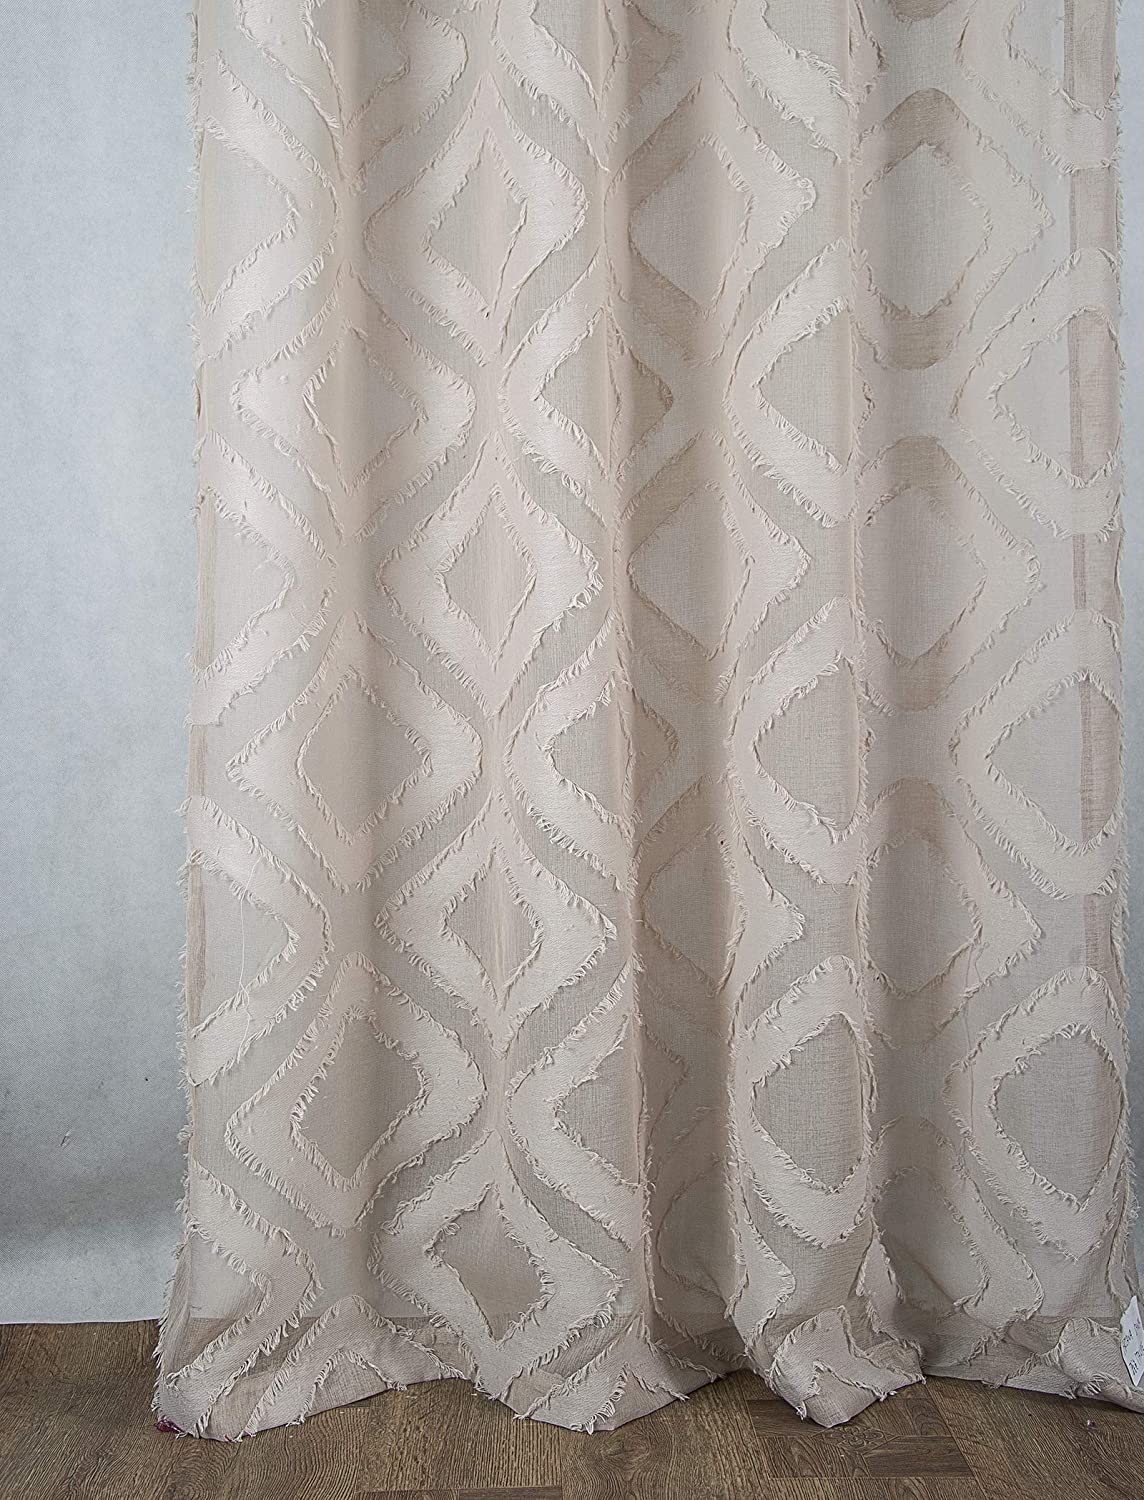 Ariana Clipped Doily 54 x 84 in. Single Grommet Curtain Panel - Linen Universe Co.